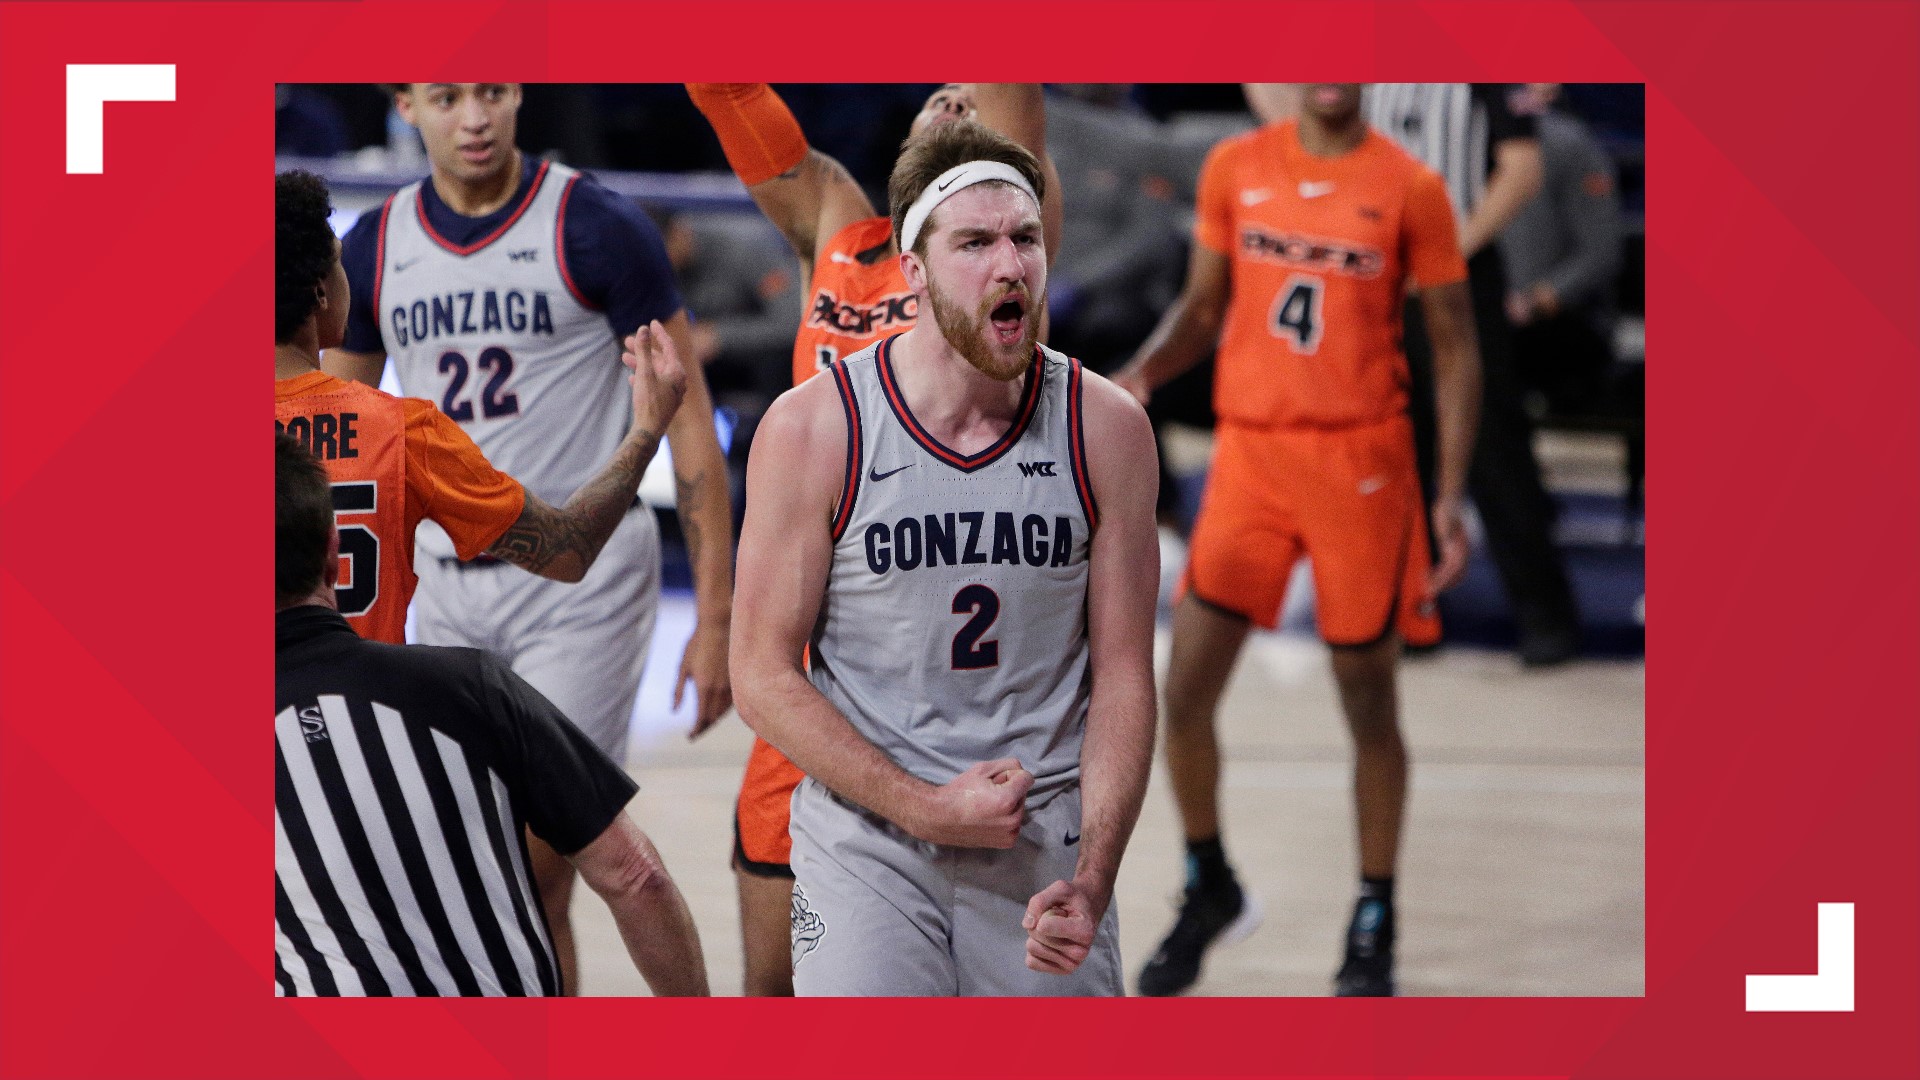 Corey Kispert had 16 points and Joel Ayayi scored 12 for Gonzaga, which won its 47th consecutive home game — the longest streak in the nation.